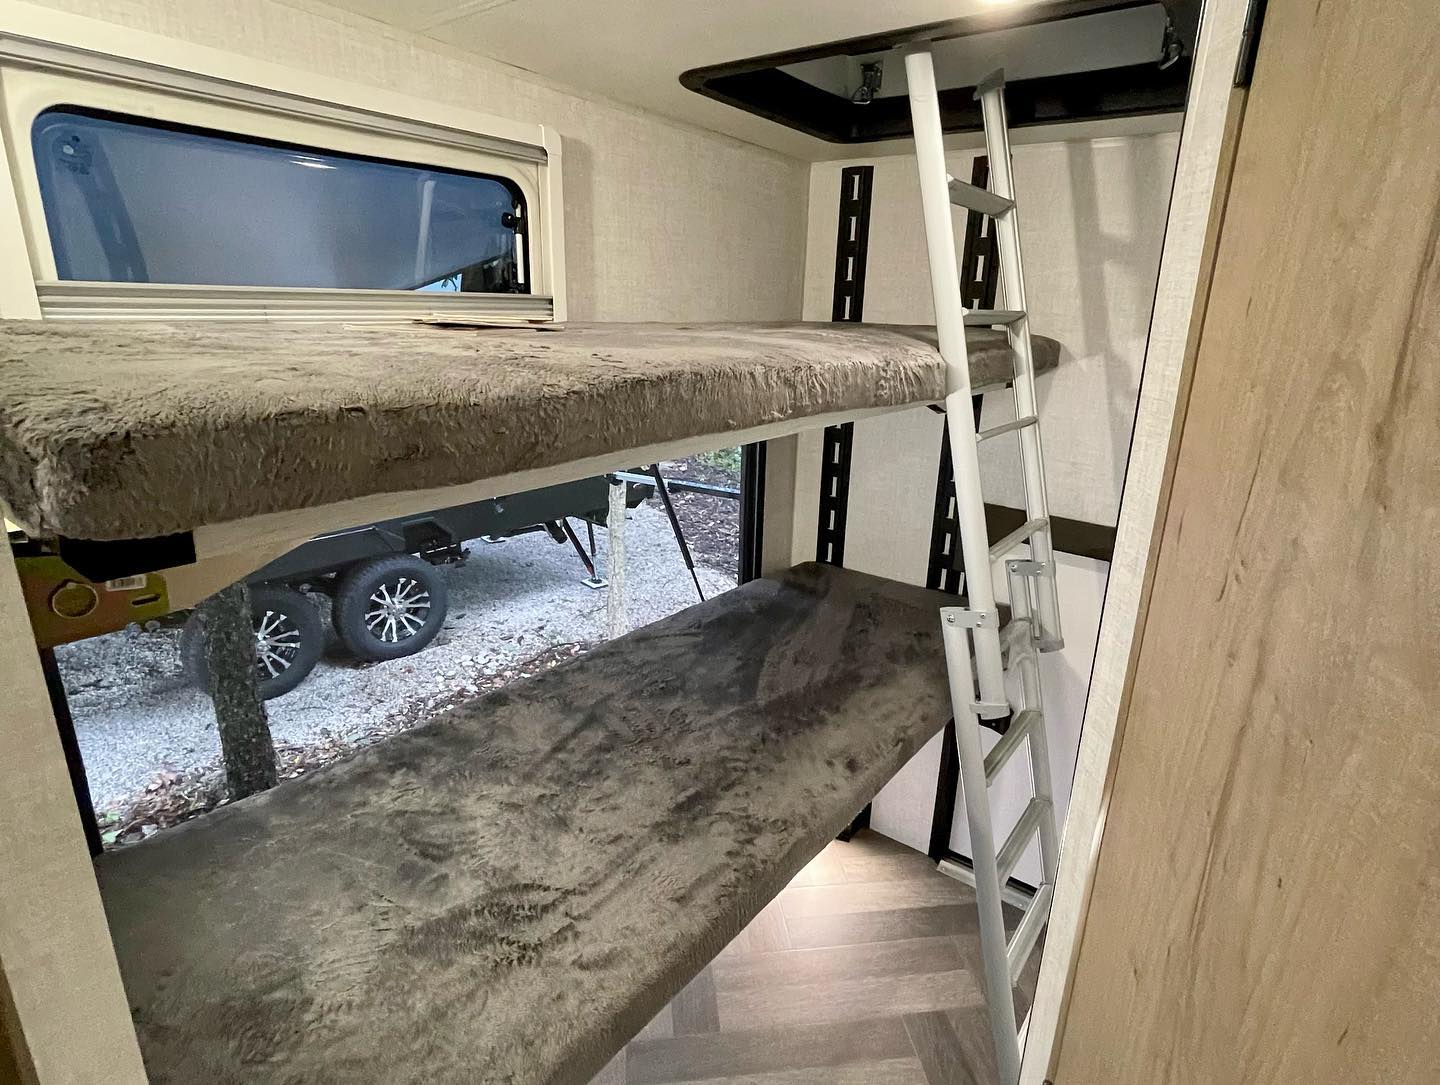 ember s overland series caters to a different niche of the rv industry and it may pay off 19 1